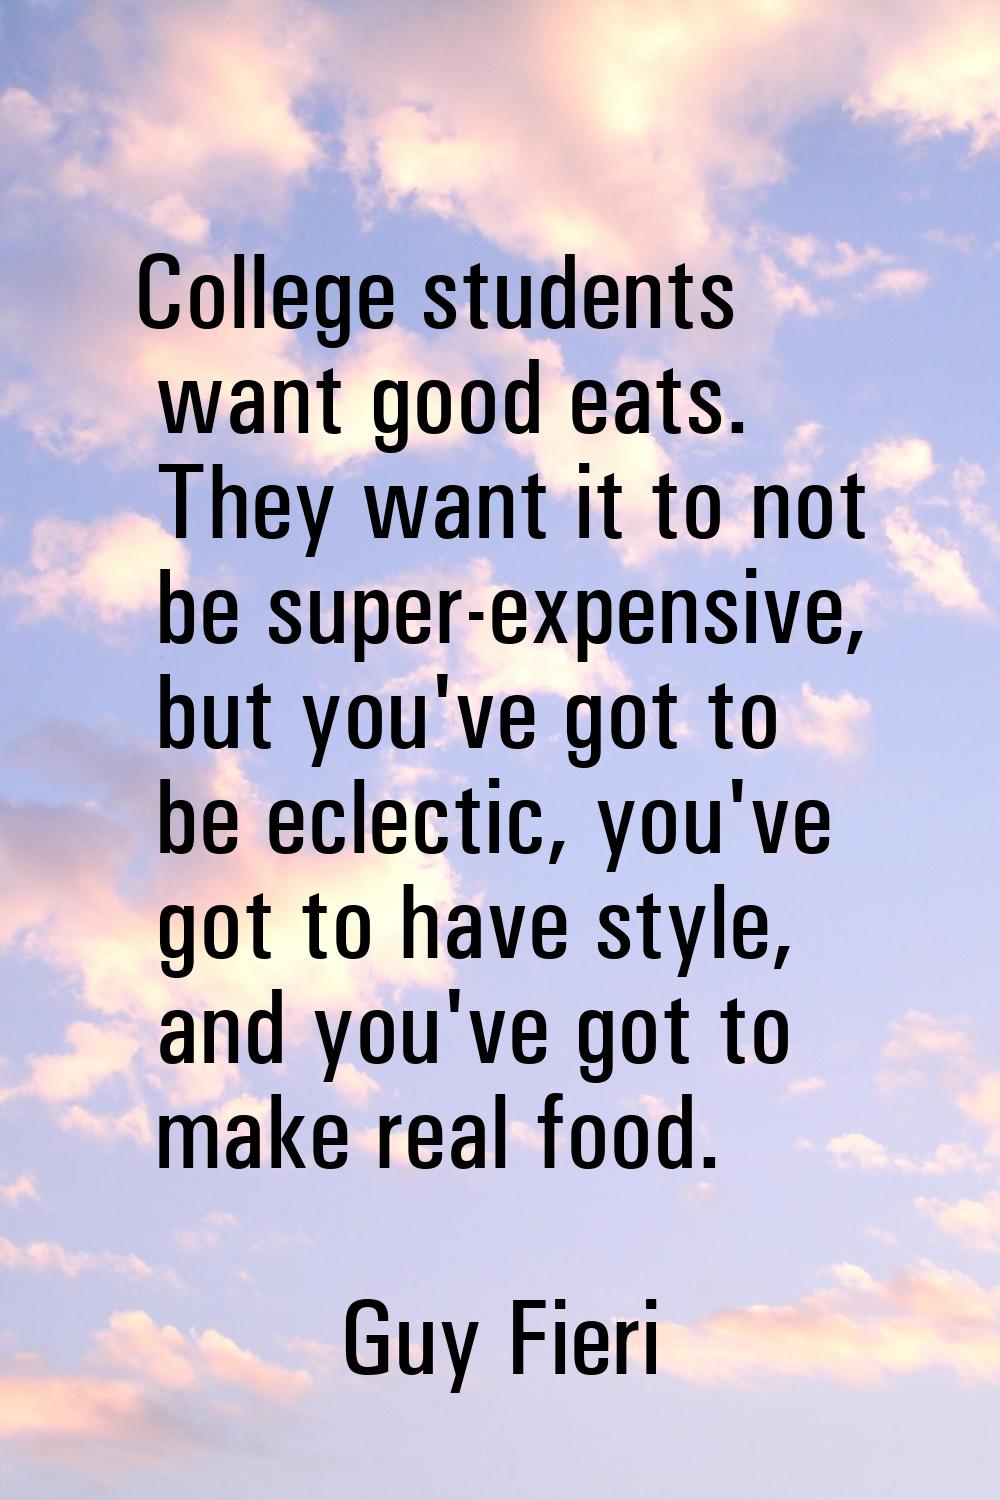 College students want good eats. They want it to not be super-expensive, but you've got to be eclec